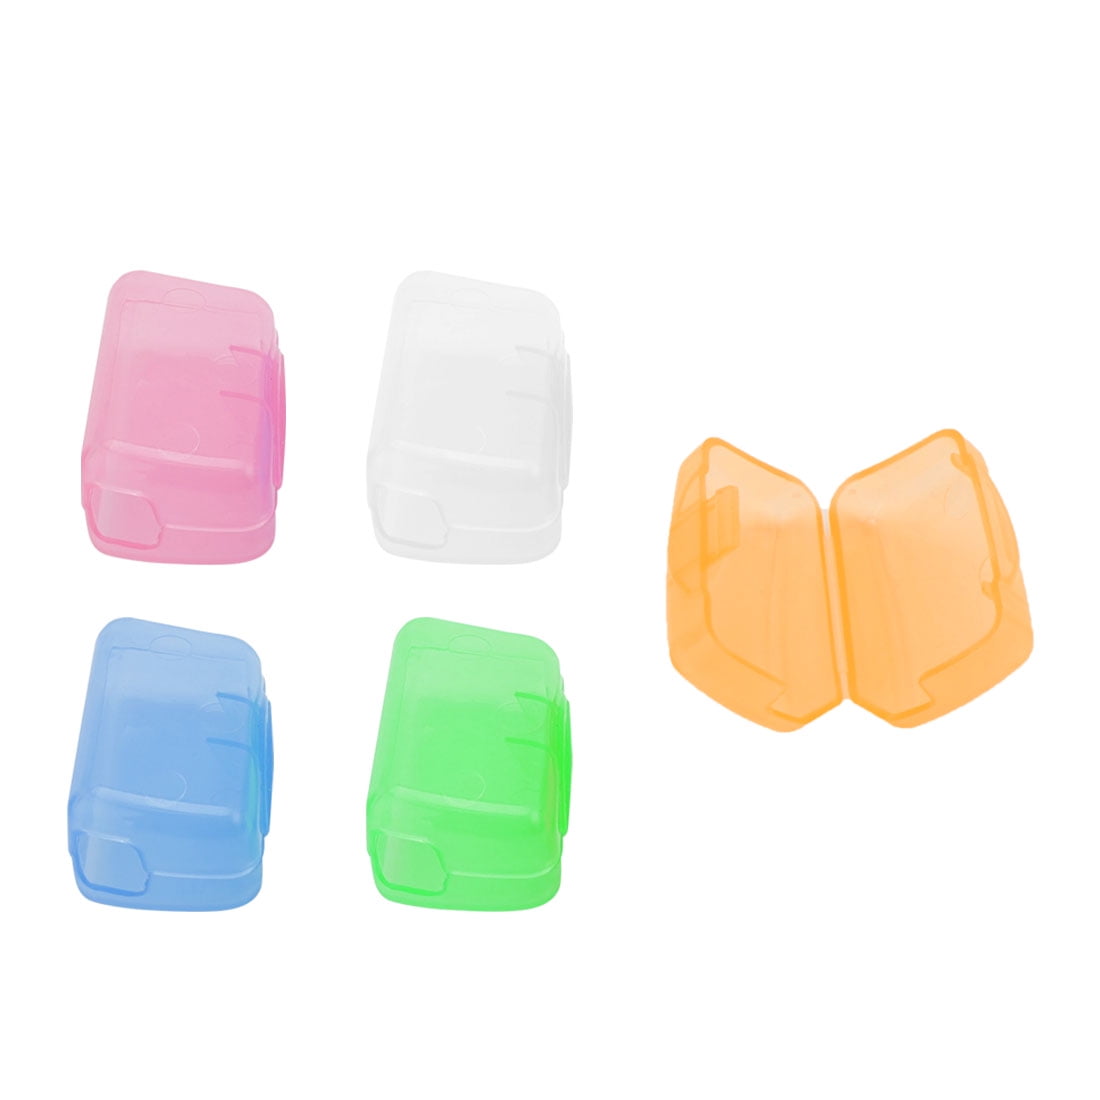 5pcs Random Color Toothbrush Head Cover Case Cap Travel Brush Cleaner Protect 